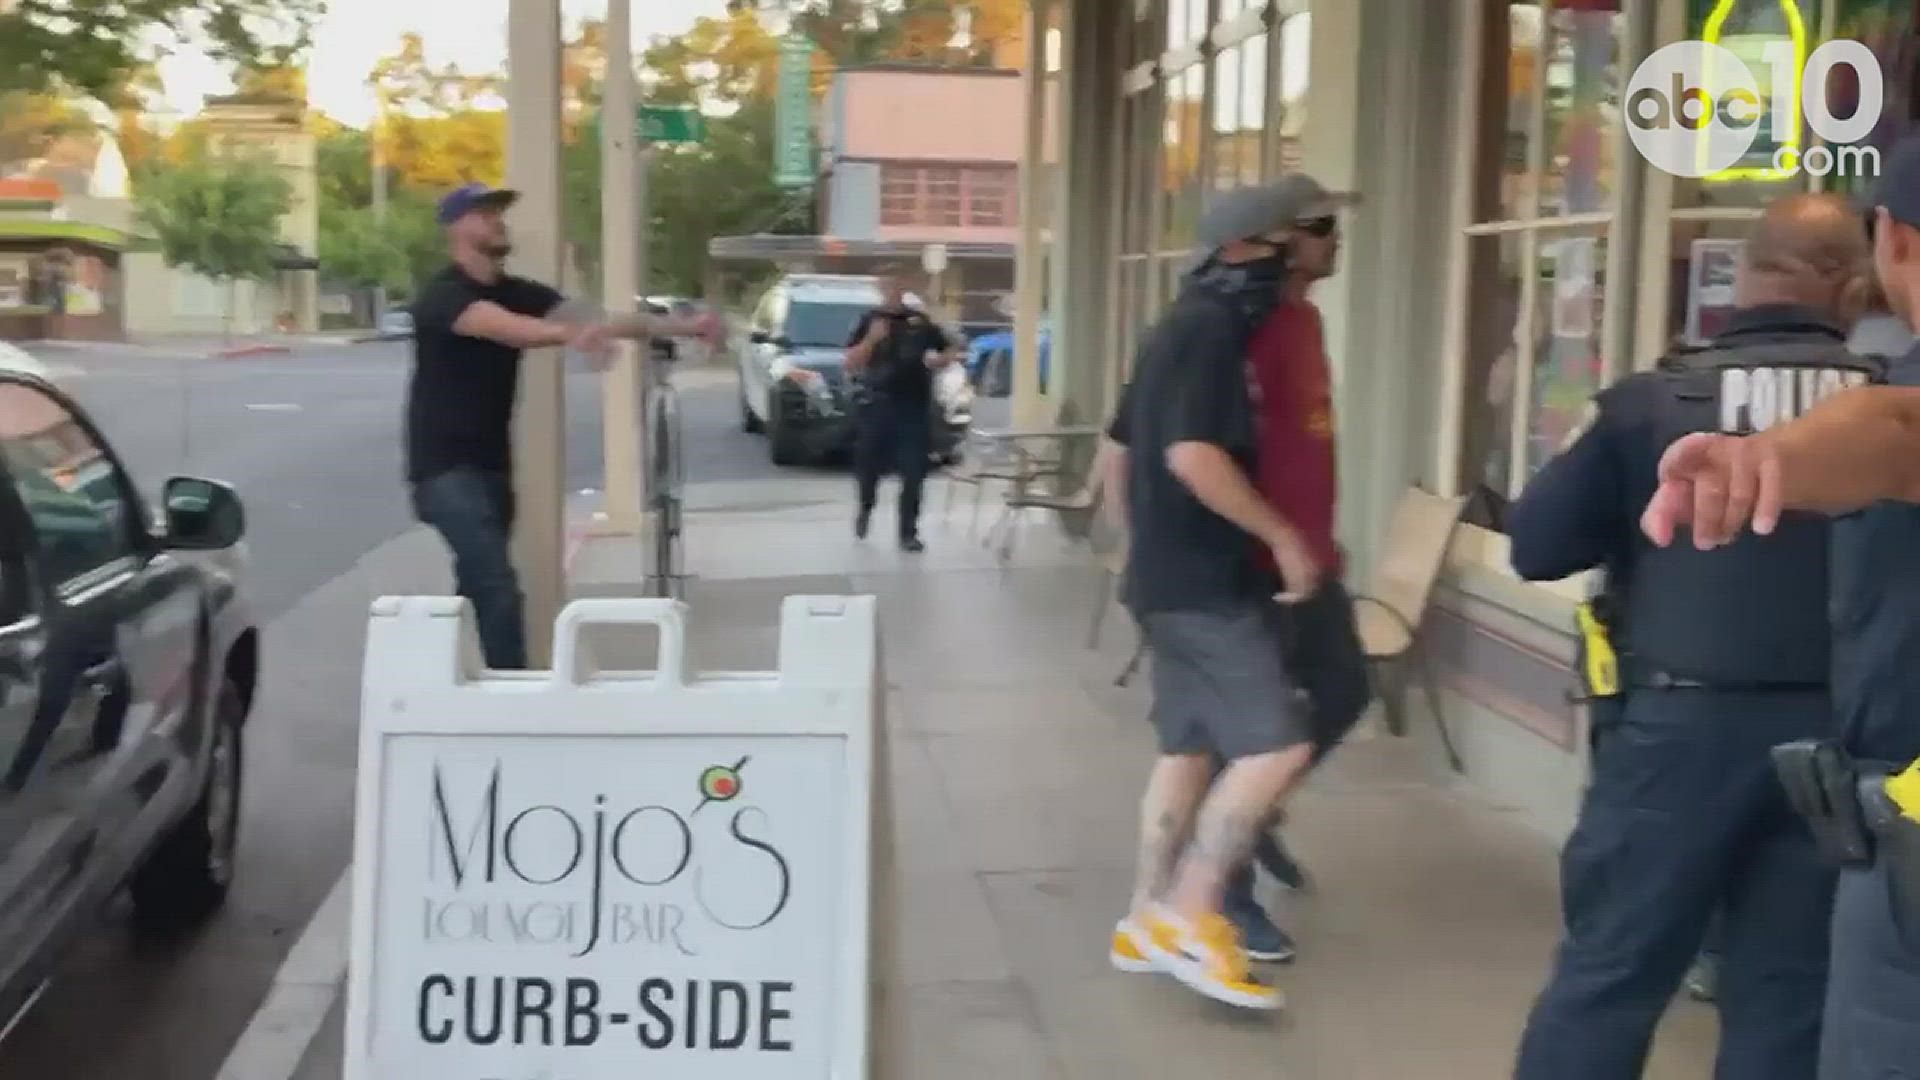 After a Woodland bar canceled a "Drag Queen Happy Hour" event due to what they said were threats of violence, video shows a group of people clashing with others.